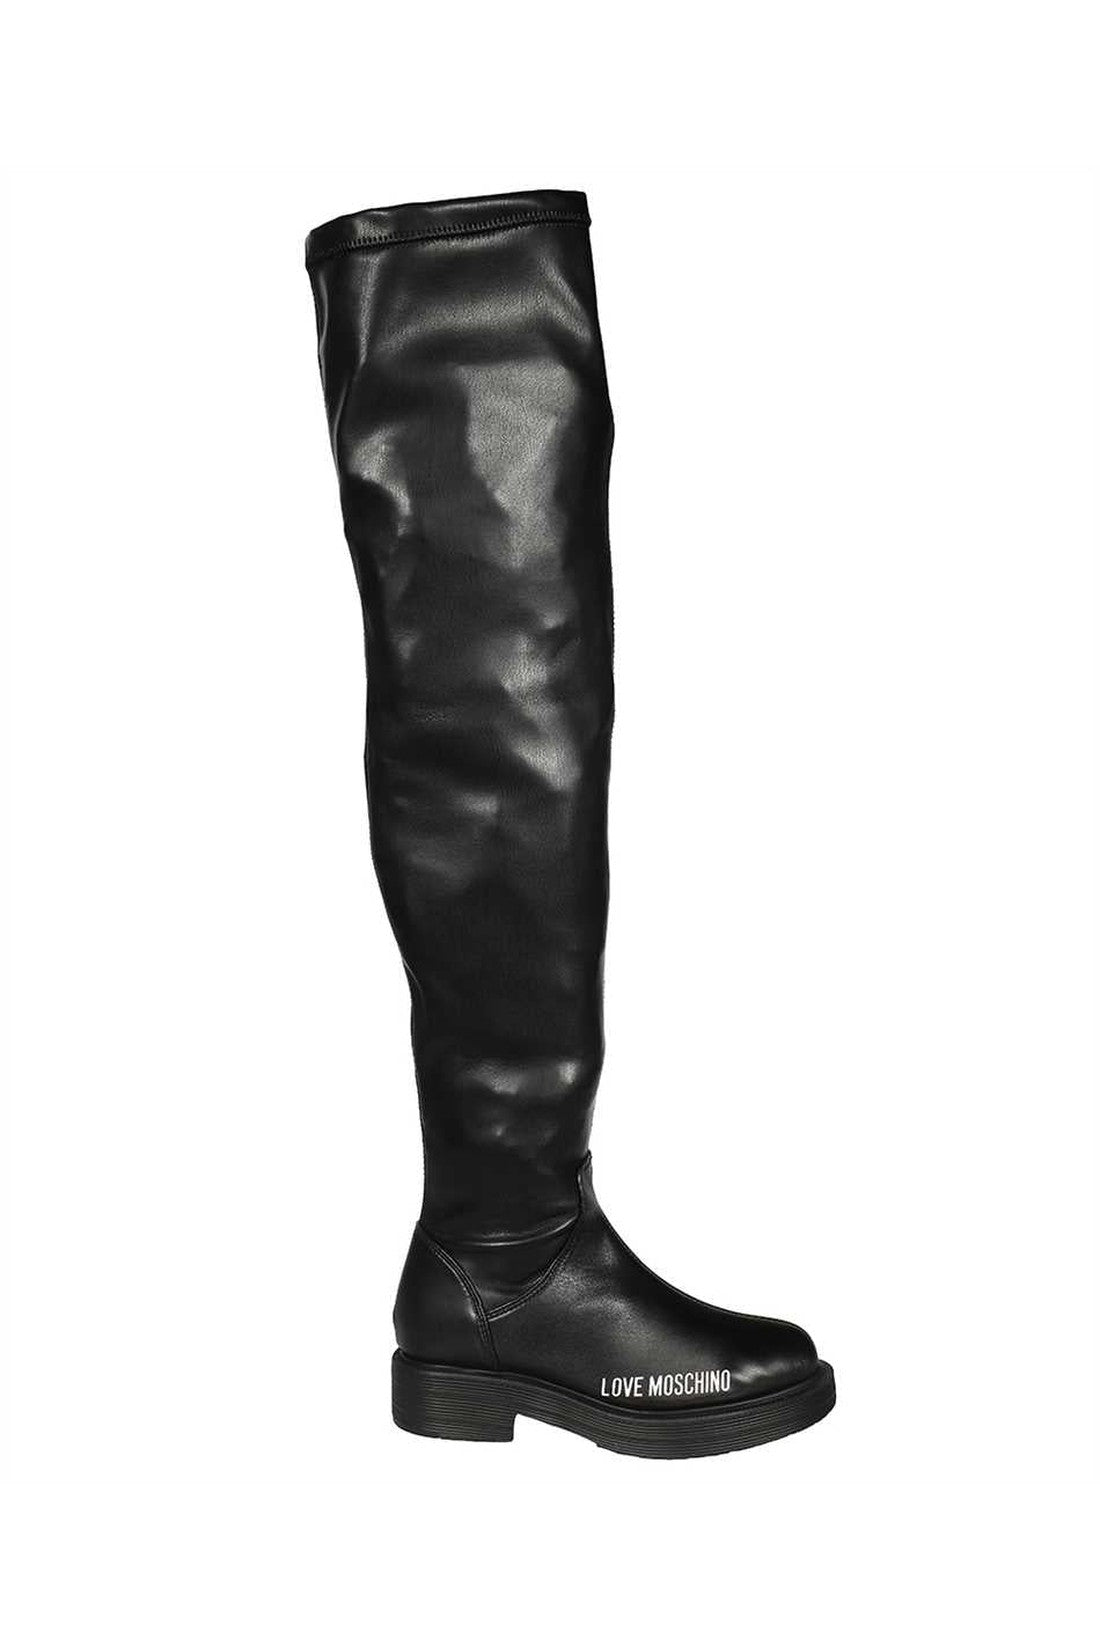 Over-the-knee boots